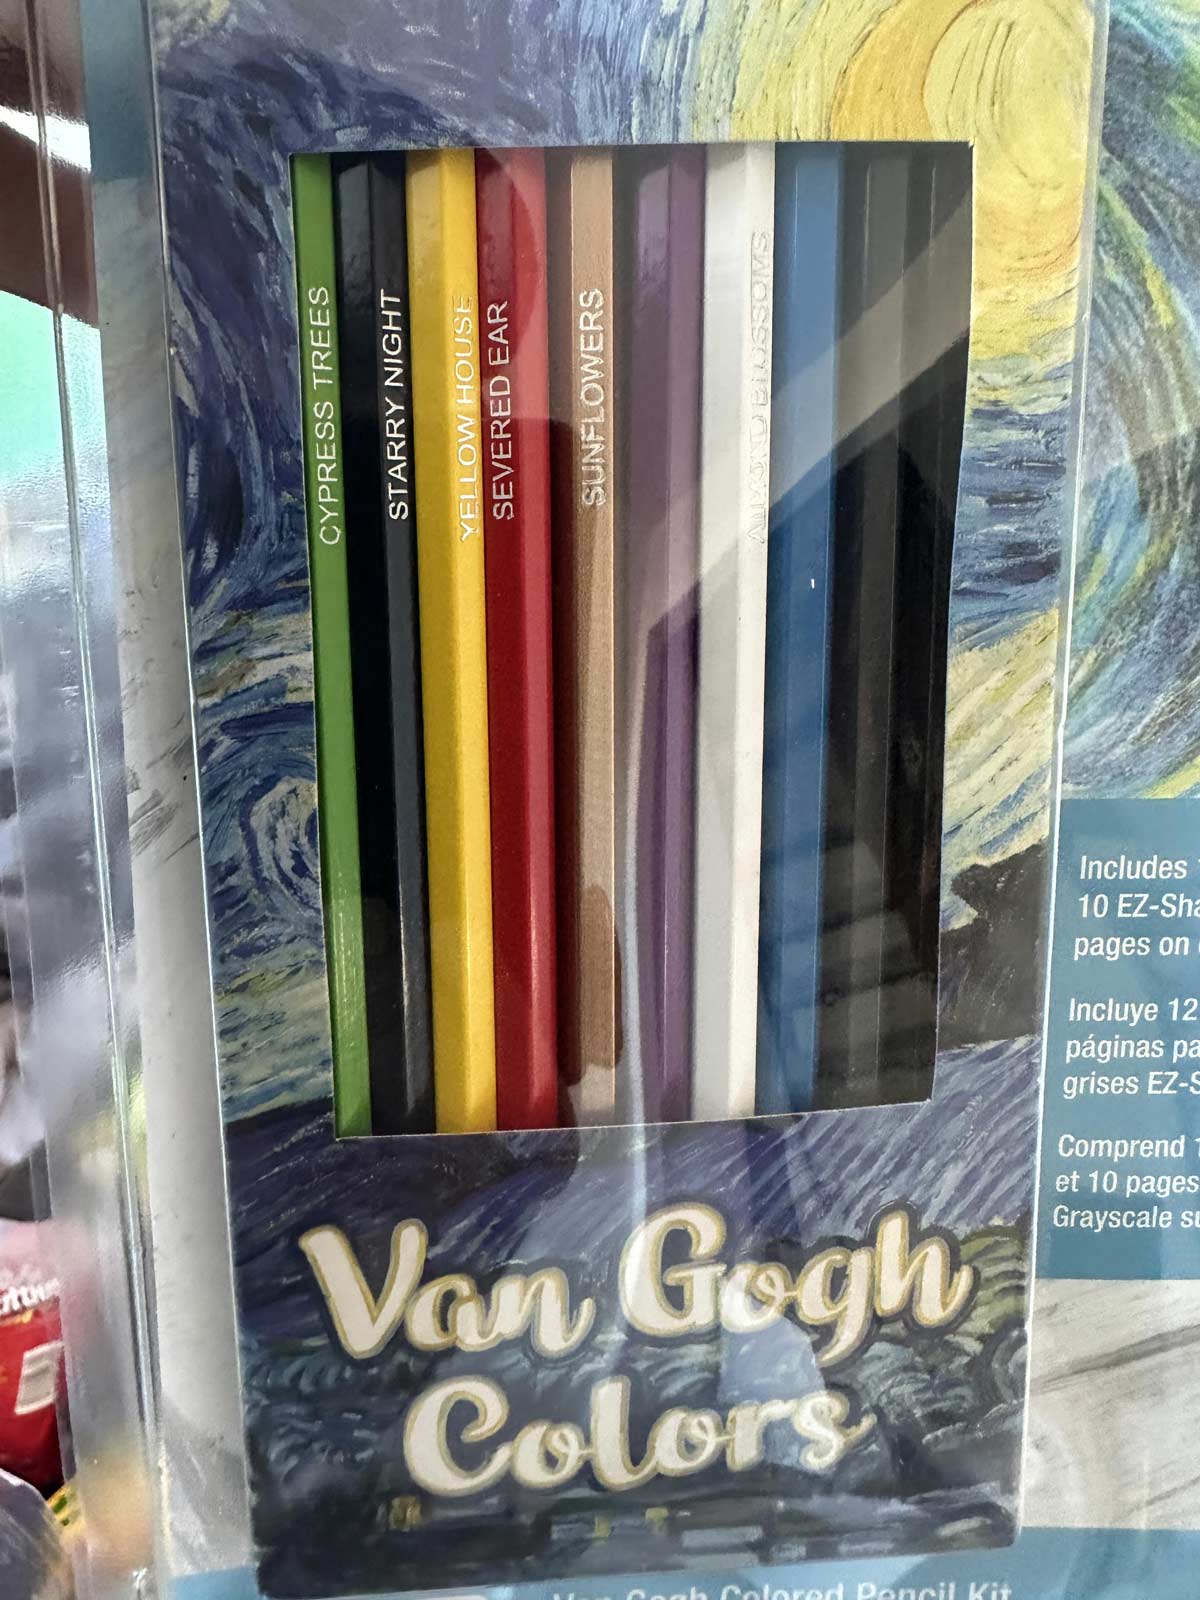 I ordered my girlfriend a Van Gogh coloring book... look what they named the red coloring pencil